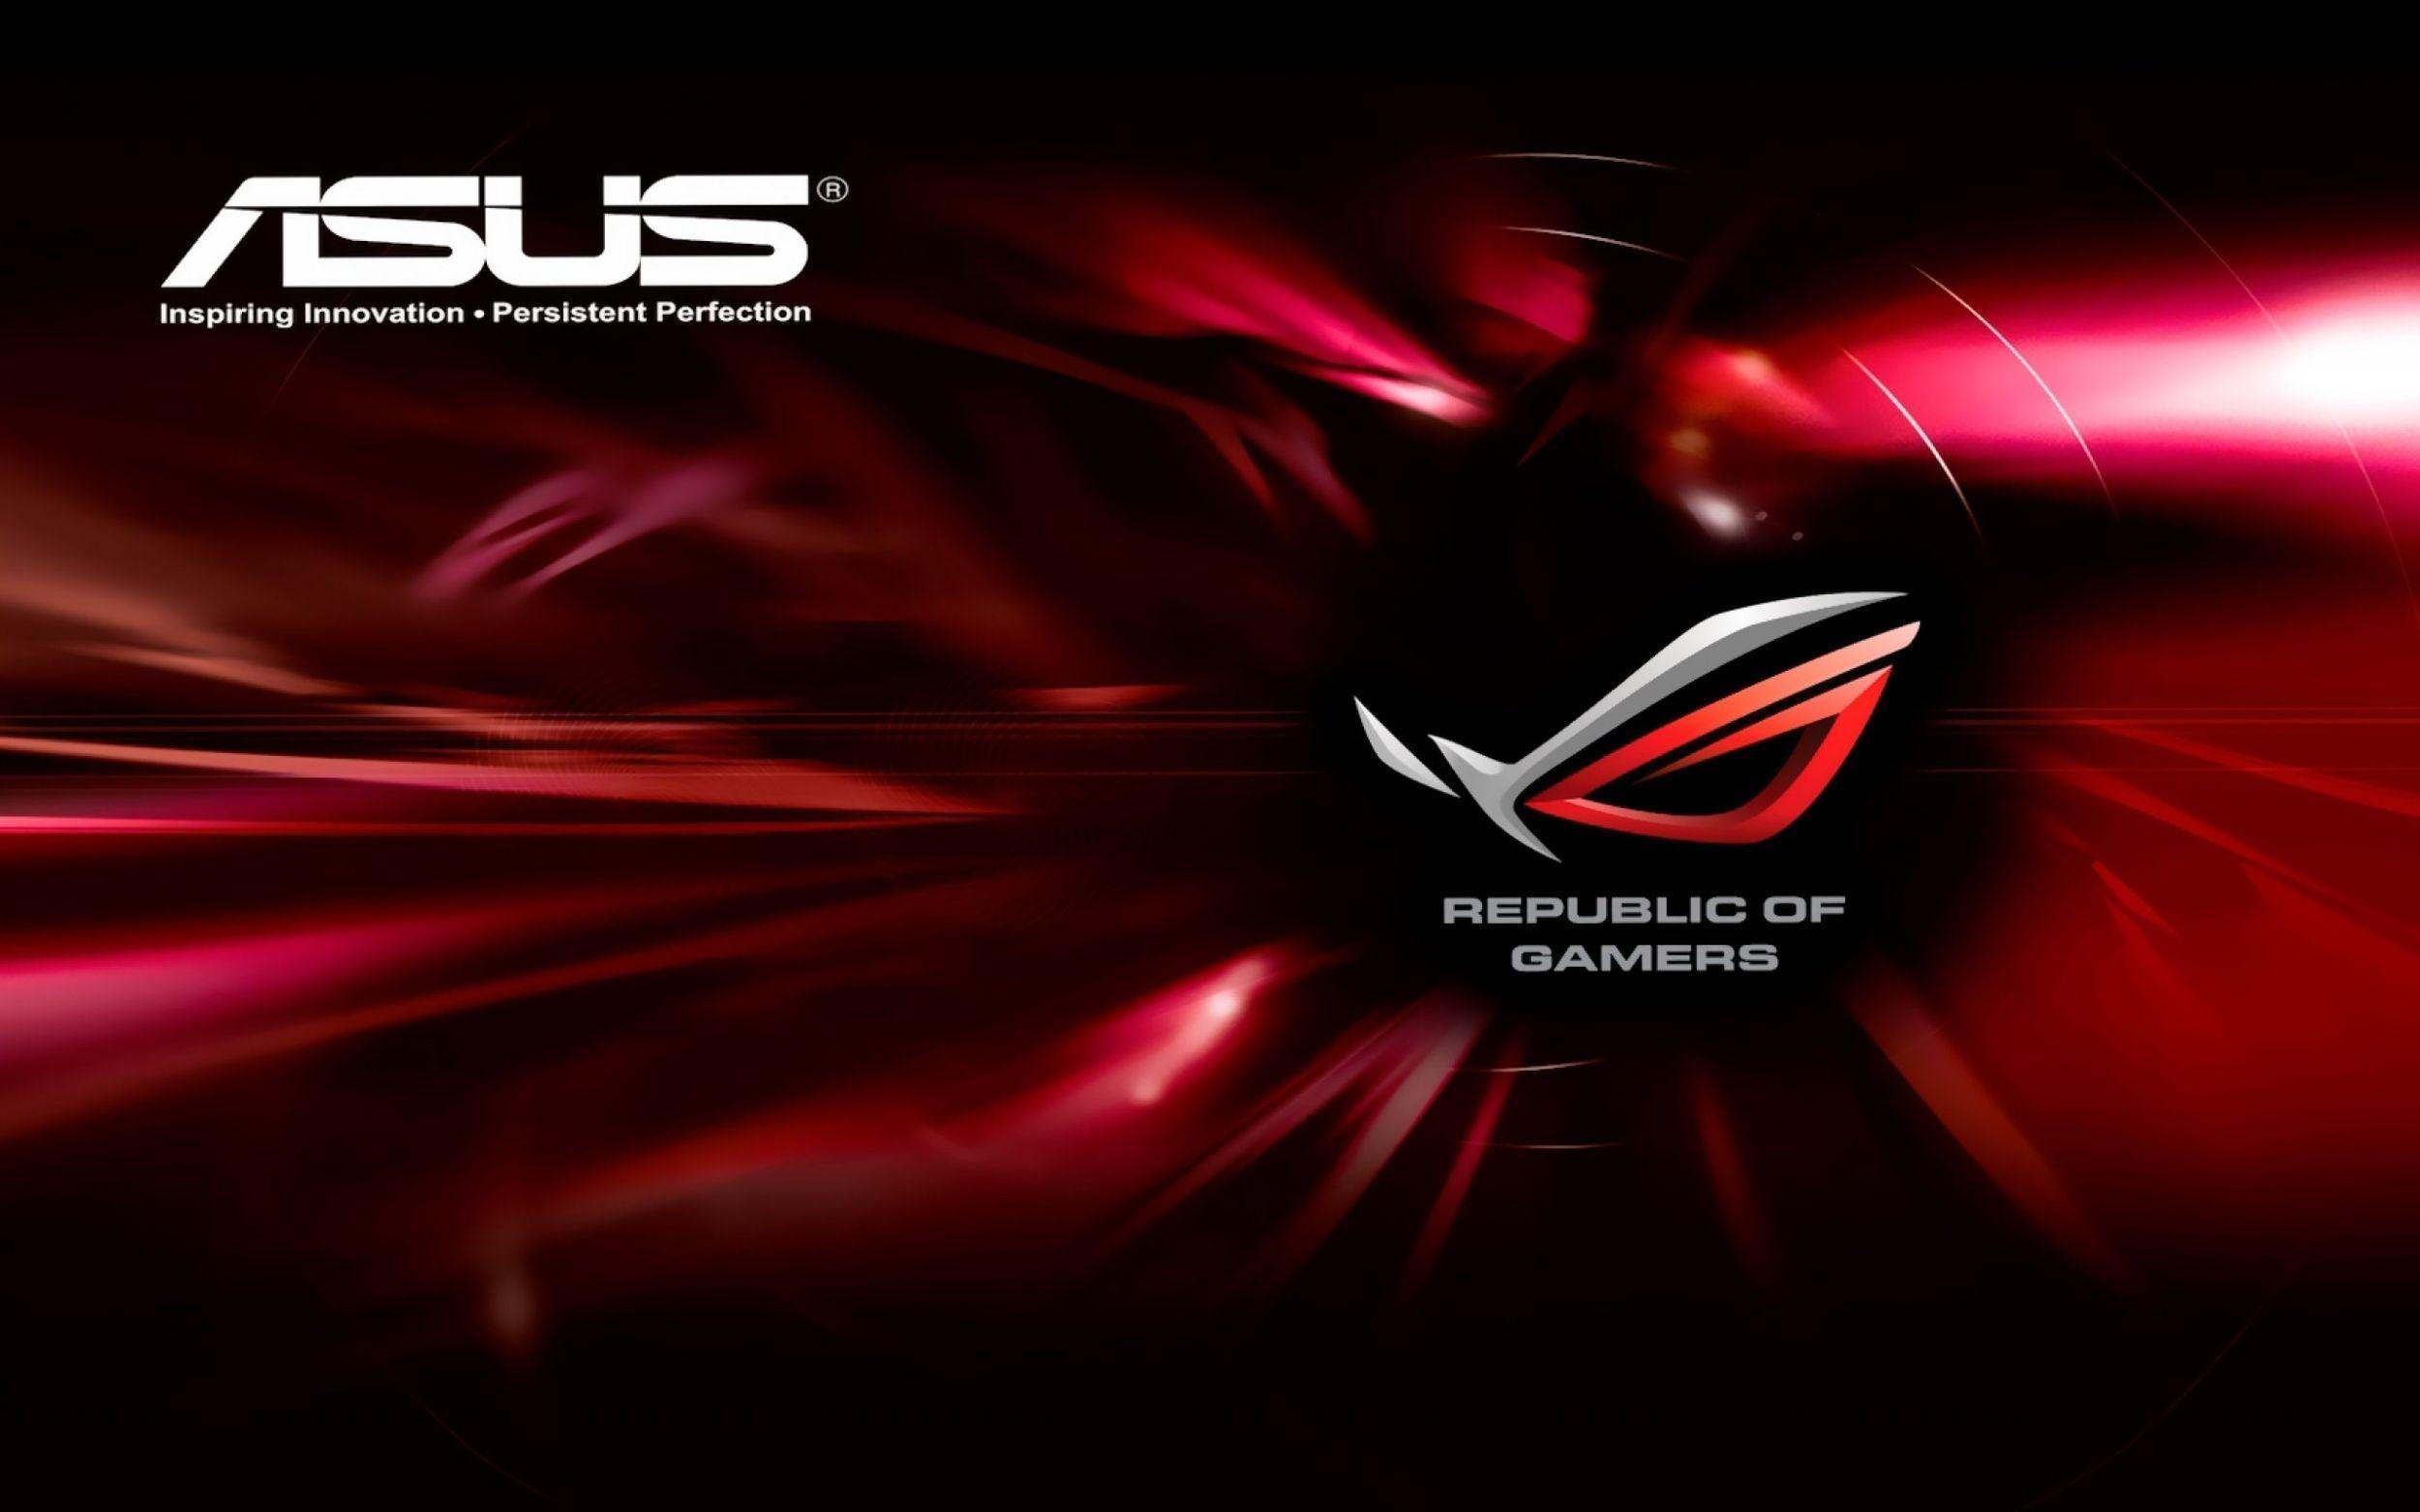 Asus Rog Photo and Picture, Asus Rog HD Quality Wallpaper for PC